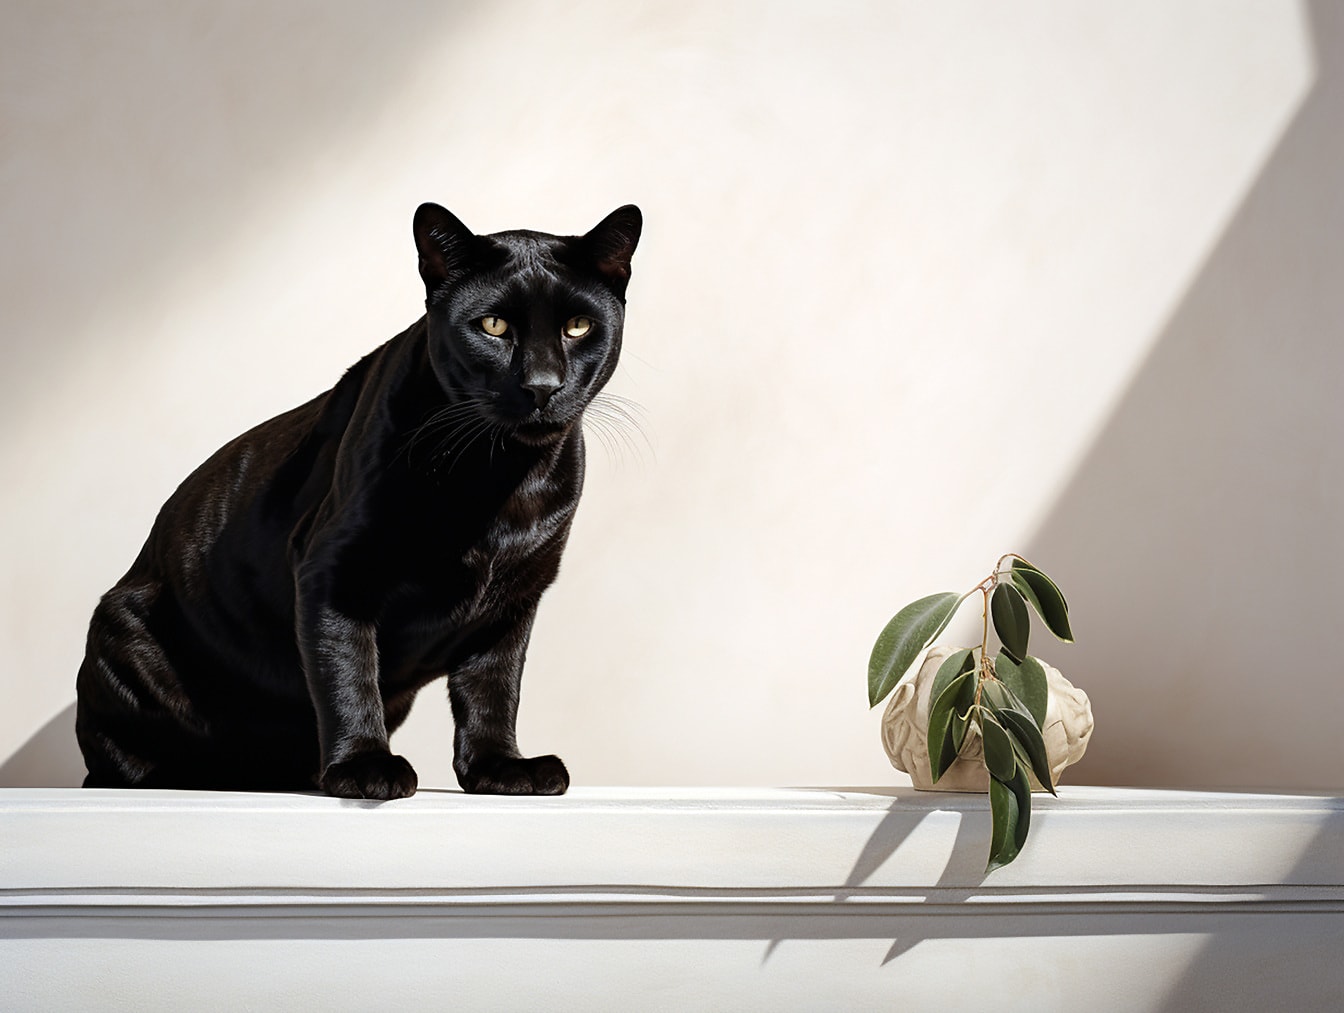 Young black panther sitting by vase in shadow digital artwork